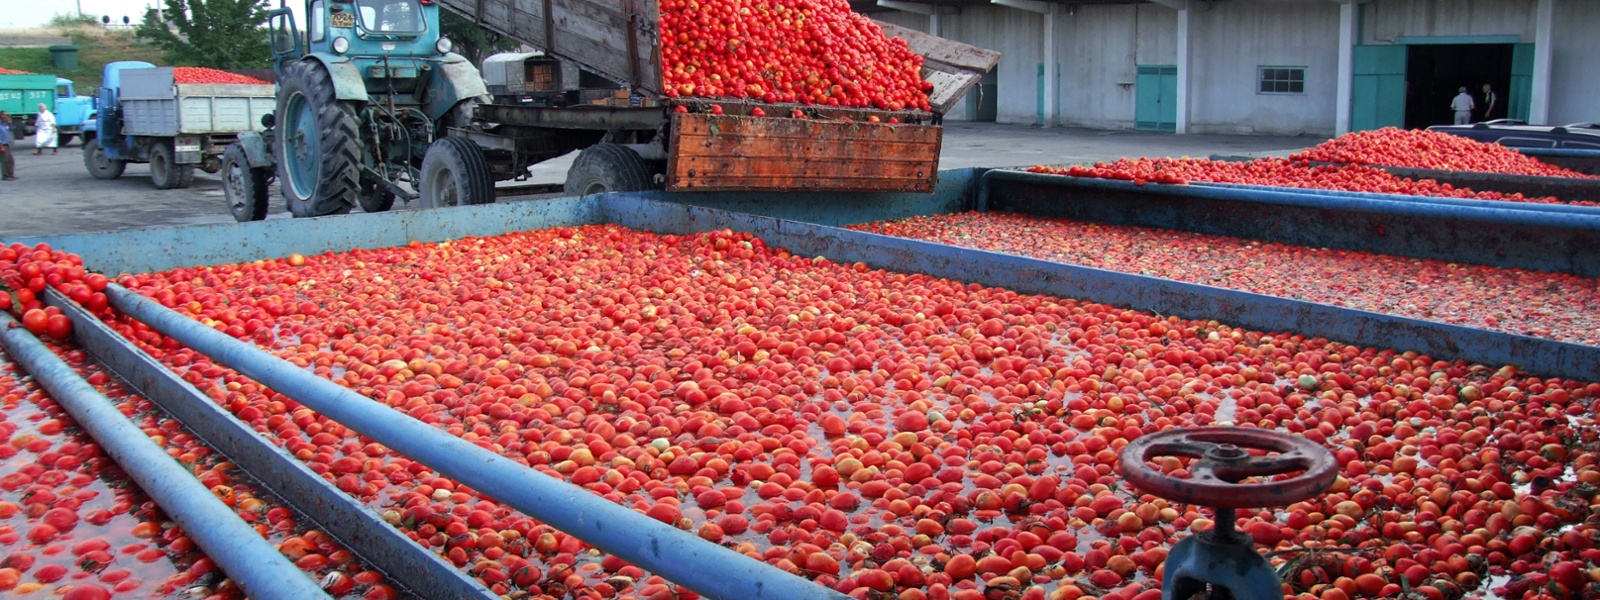 With canning tomato price unset, growers mull options